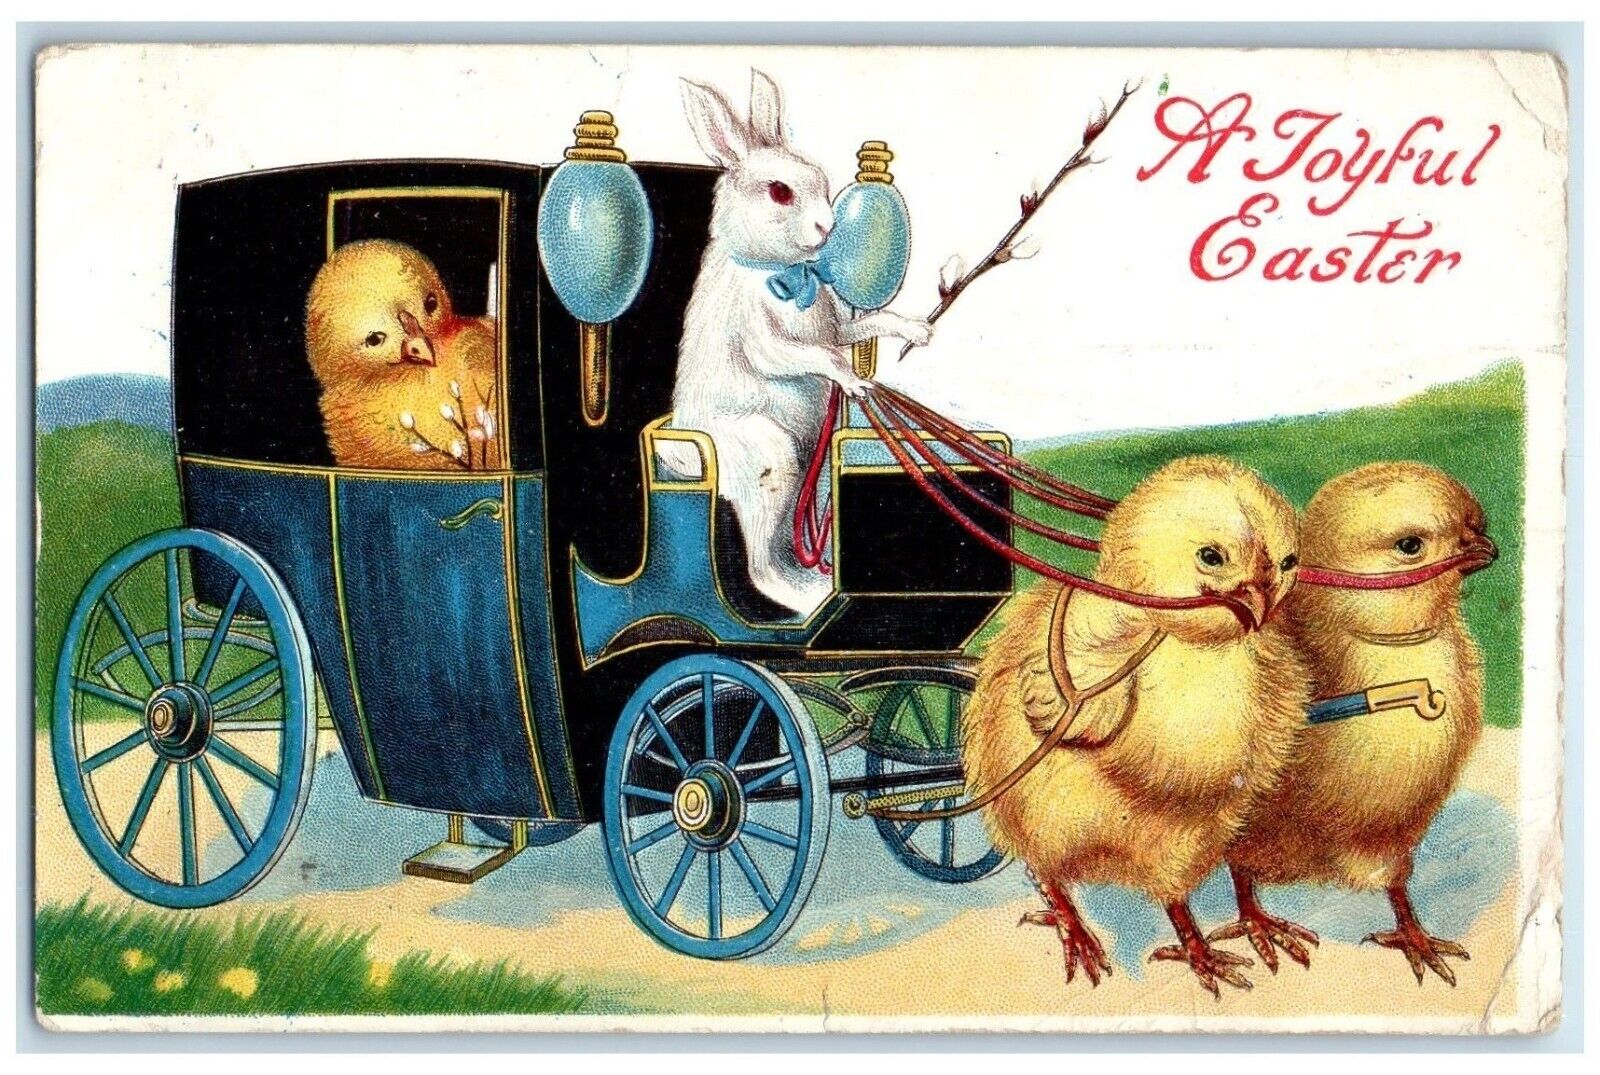 1911 Easter Wishes Chicks Pulling Carriage Pipe Berry Decorah Iowa IA Postcard